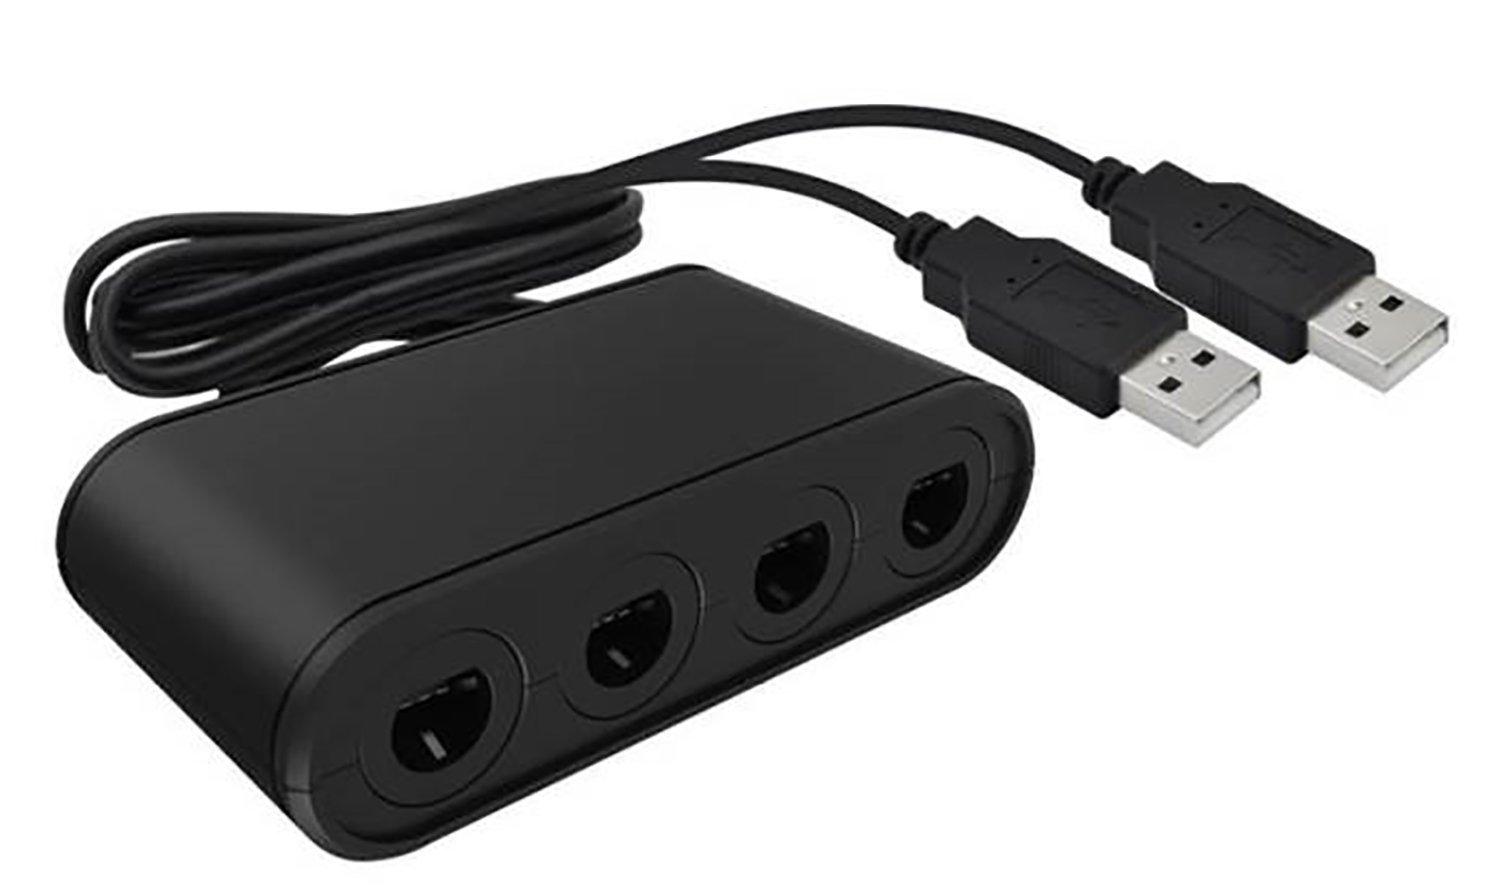 usb adapter switch controller